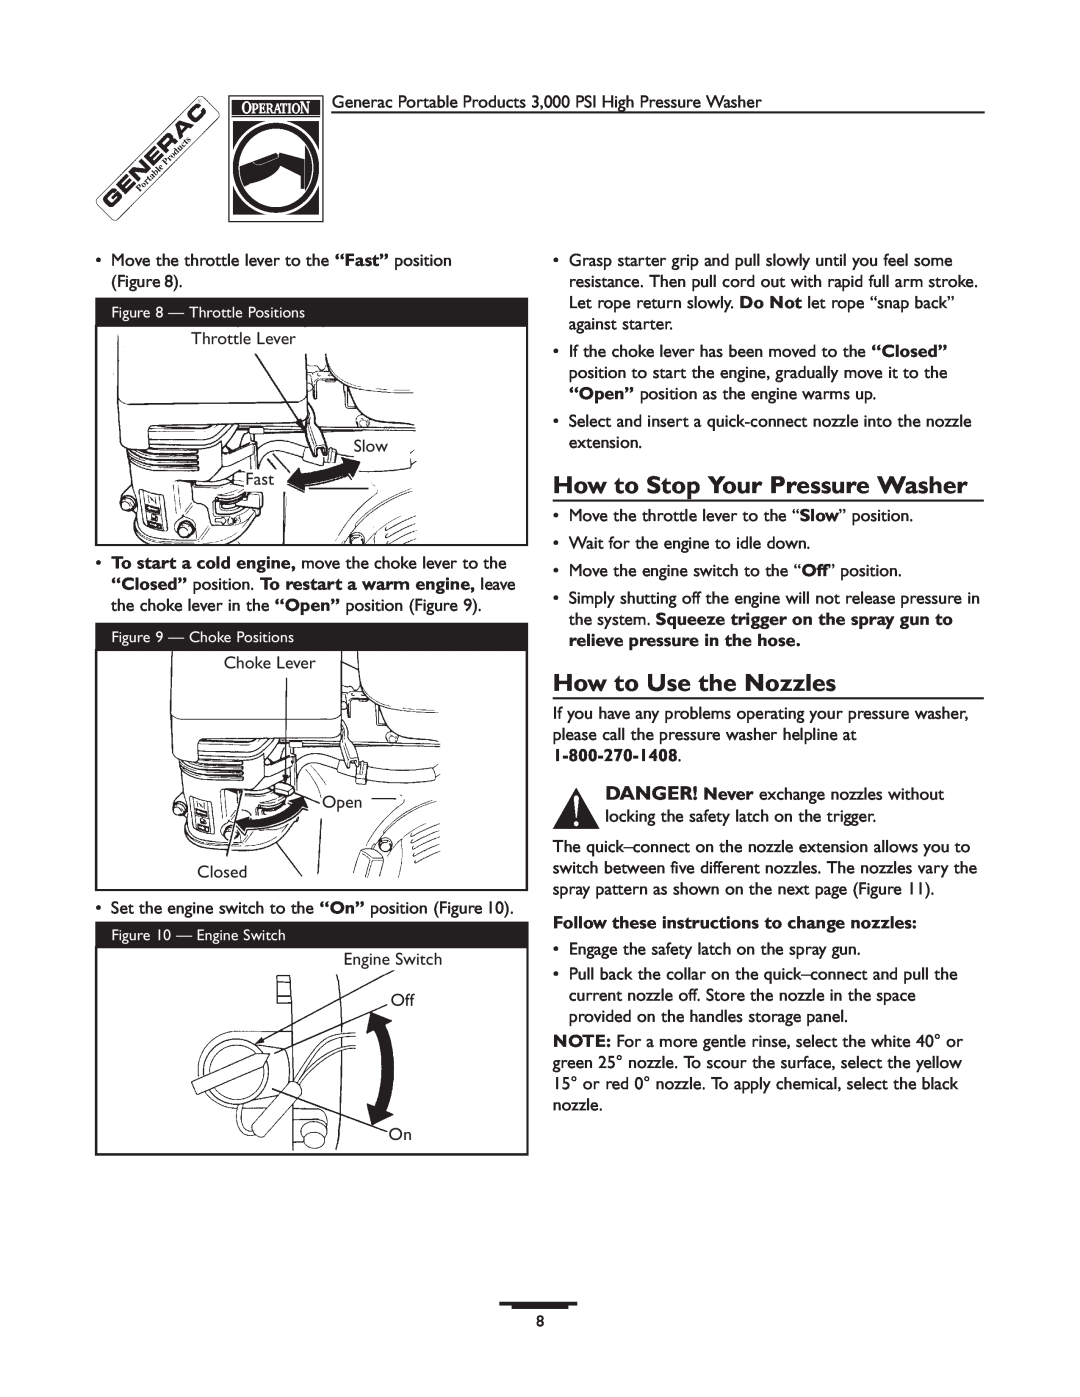 Generac 1418-0 manual How to Stop Your Pressure Washer, How to Use the Nozzles, Follow these instructions to change nozzles 